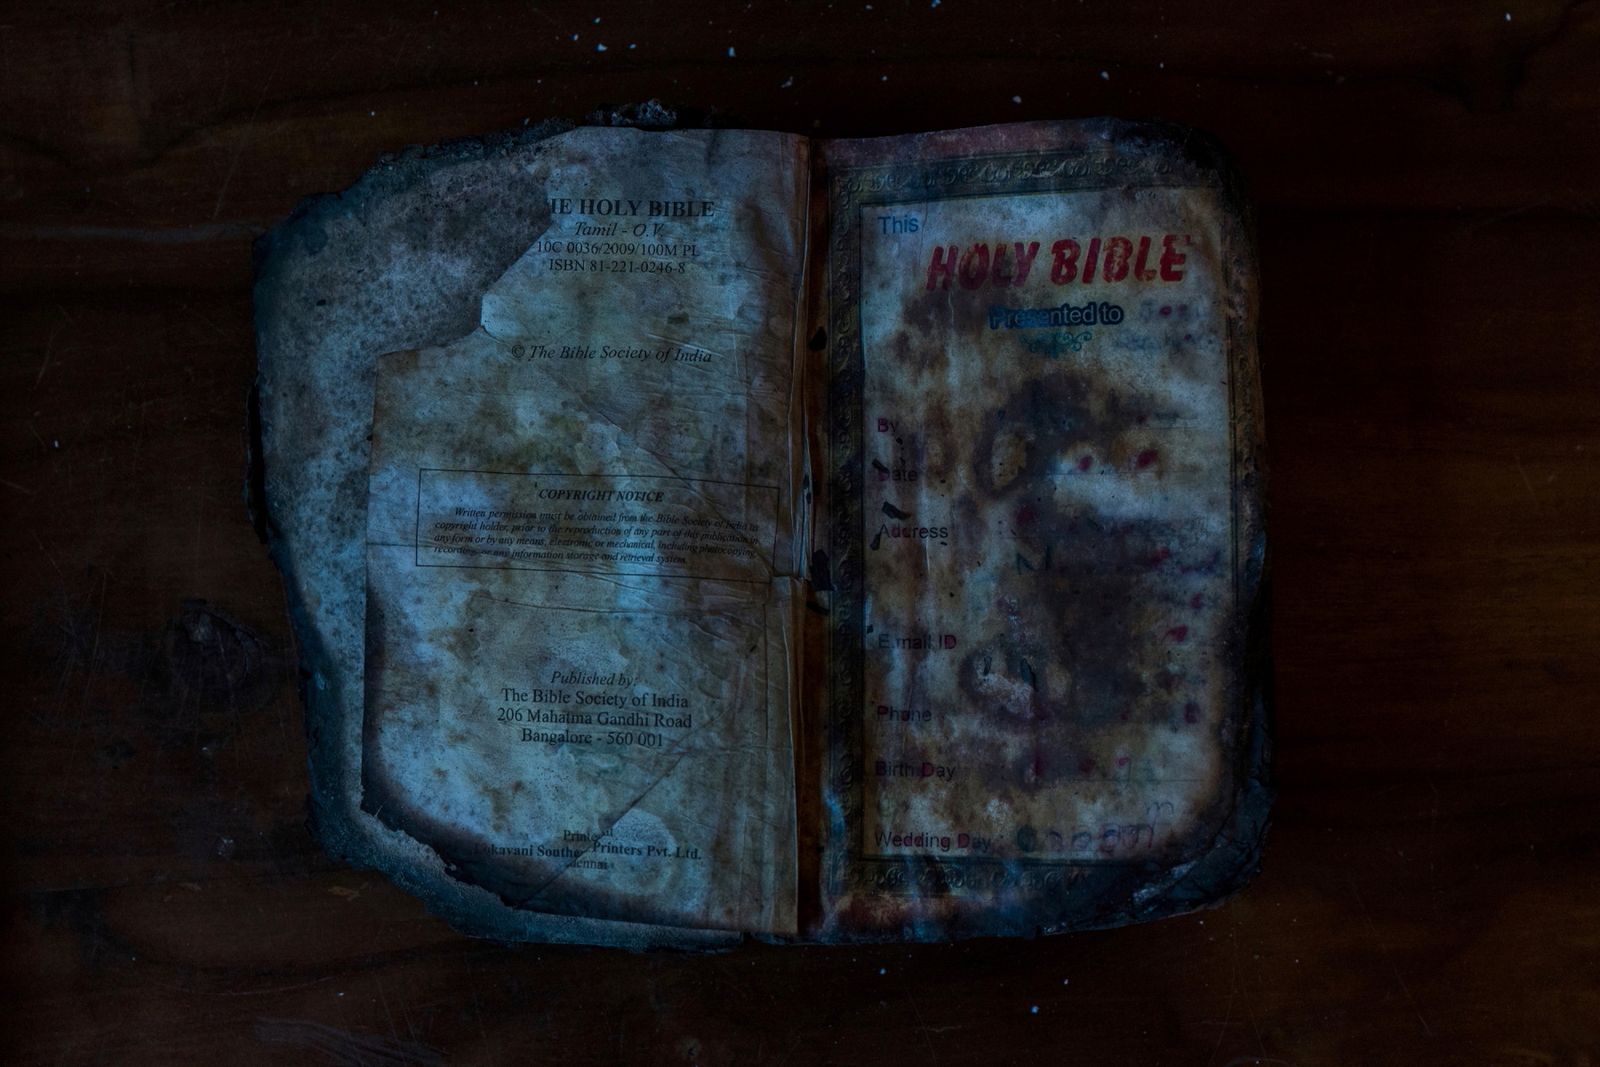 © Kai Yokoyama - Bible/A burnt Bible found in the church whose owner is still unknown.